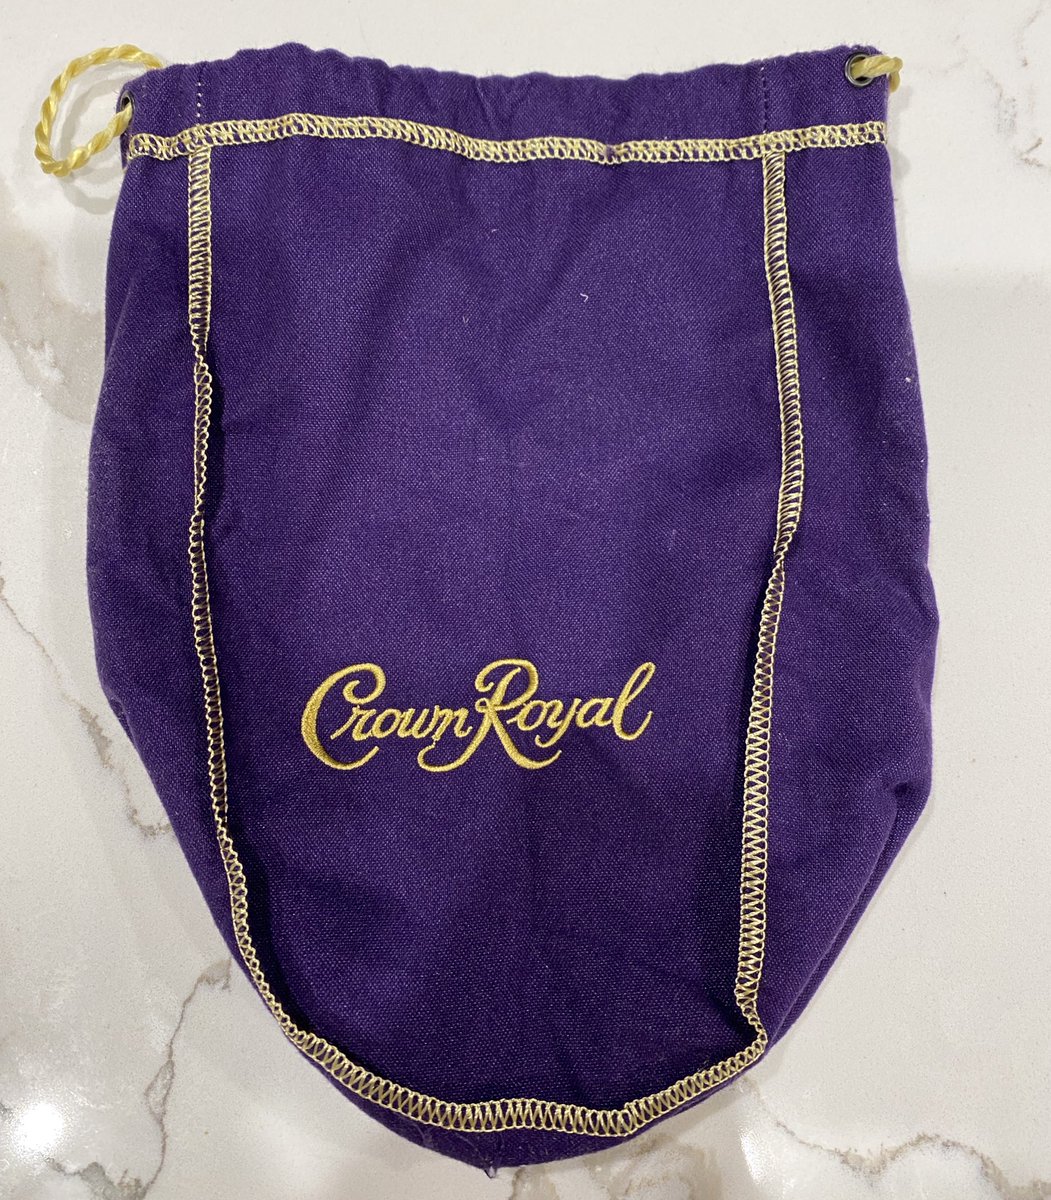 What do you do with those Crown Royal bags?Bartender: We throw them away. 